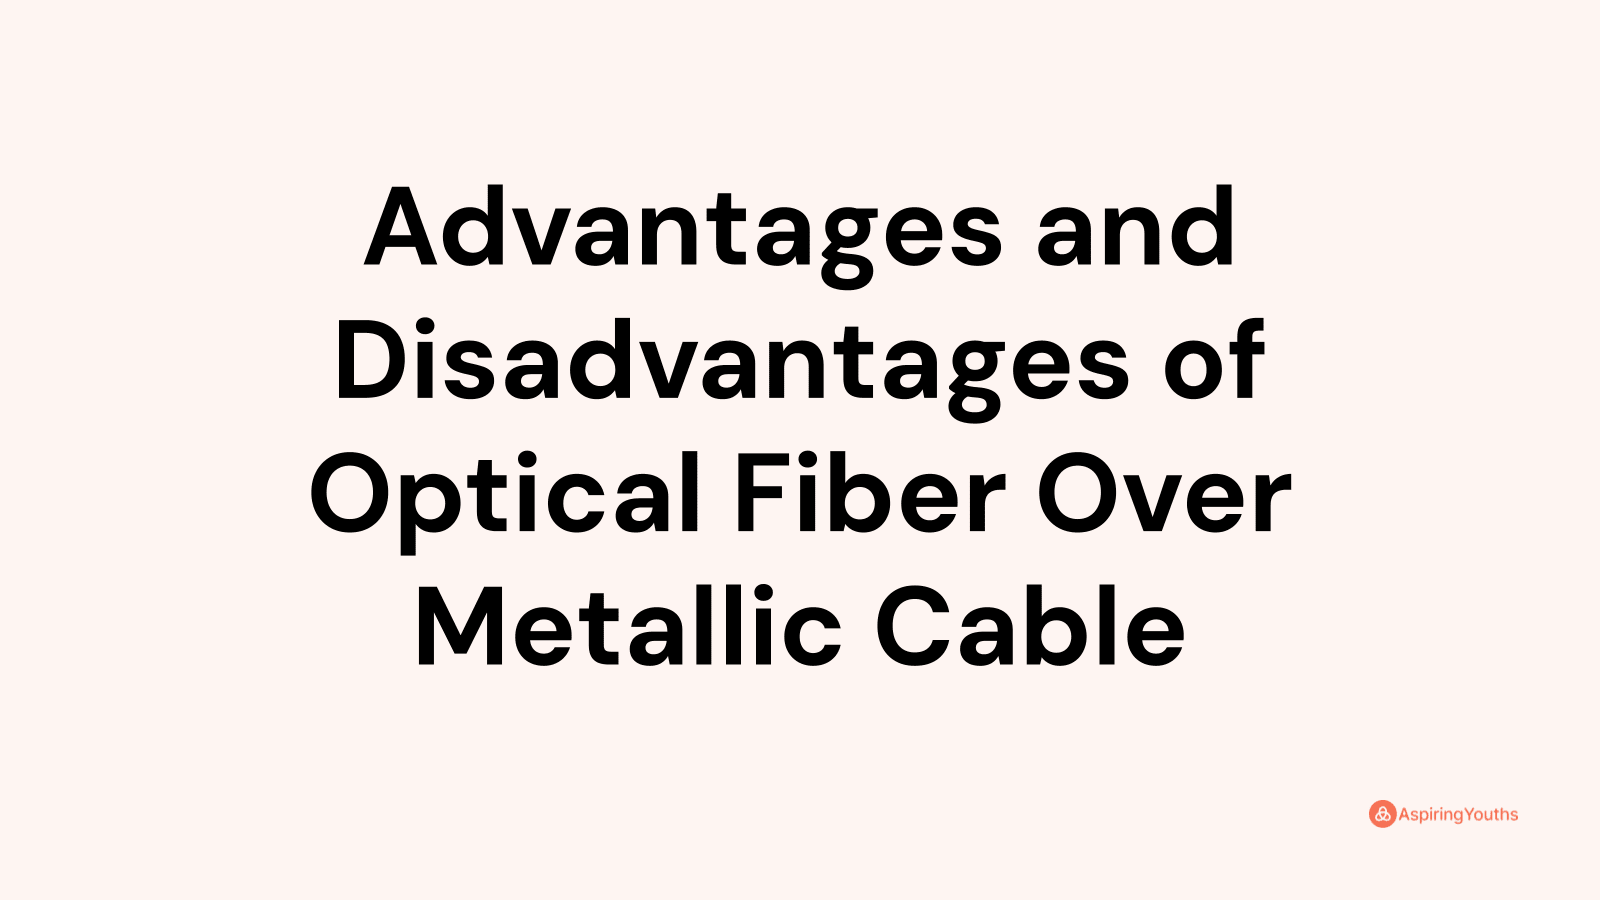 Advantages and disadvantages of Optical Fiber Over Metallic Cable